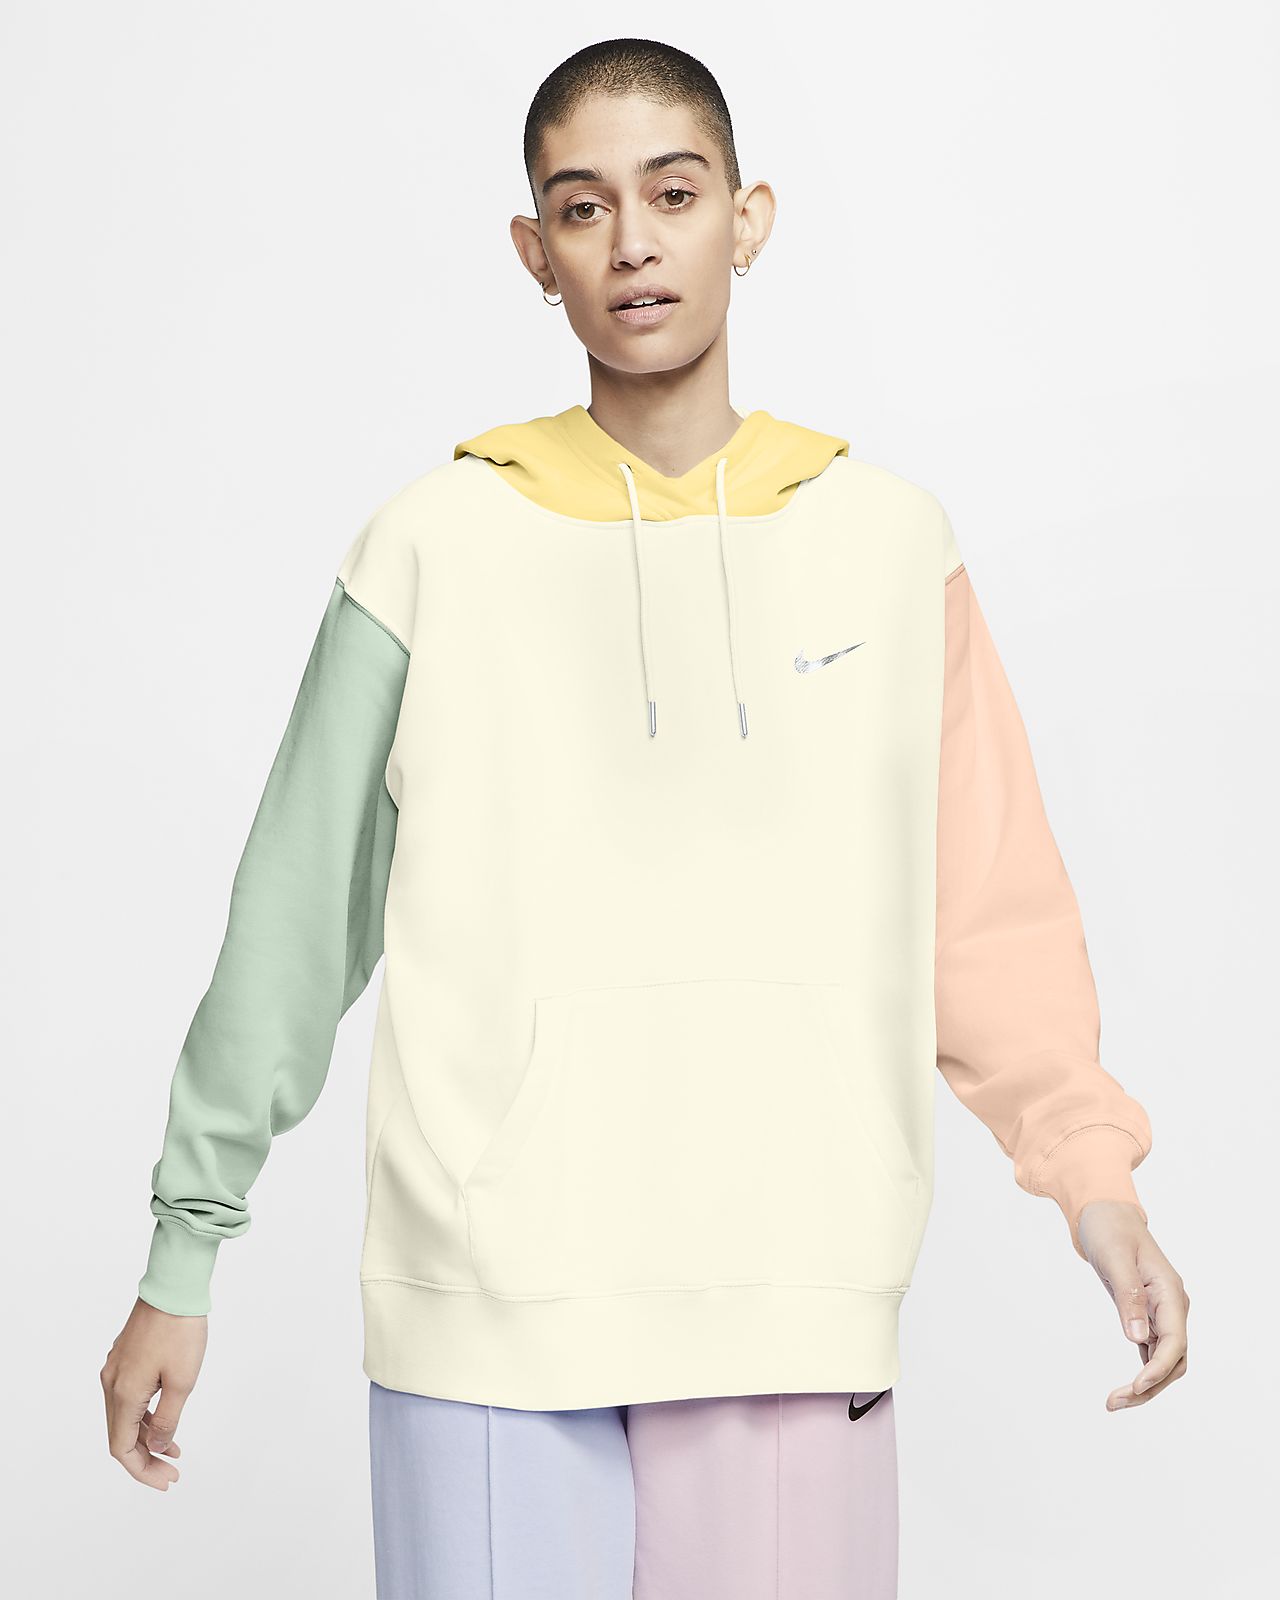 Swoosh Pullover Hoodie. Nike IL